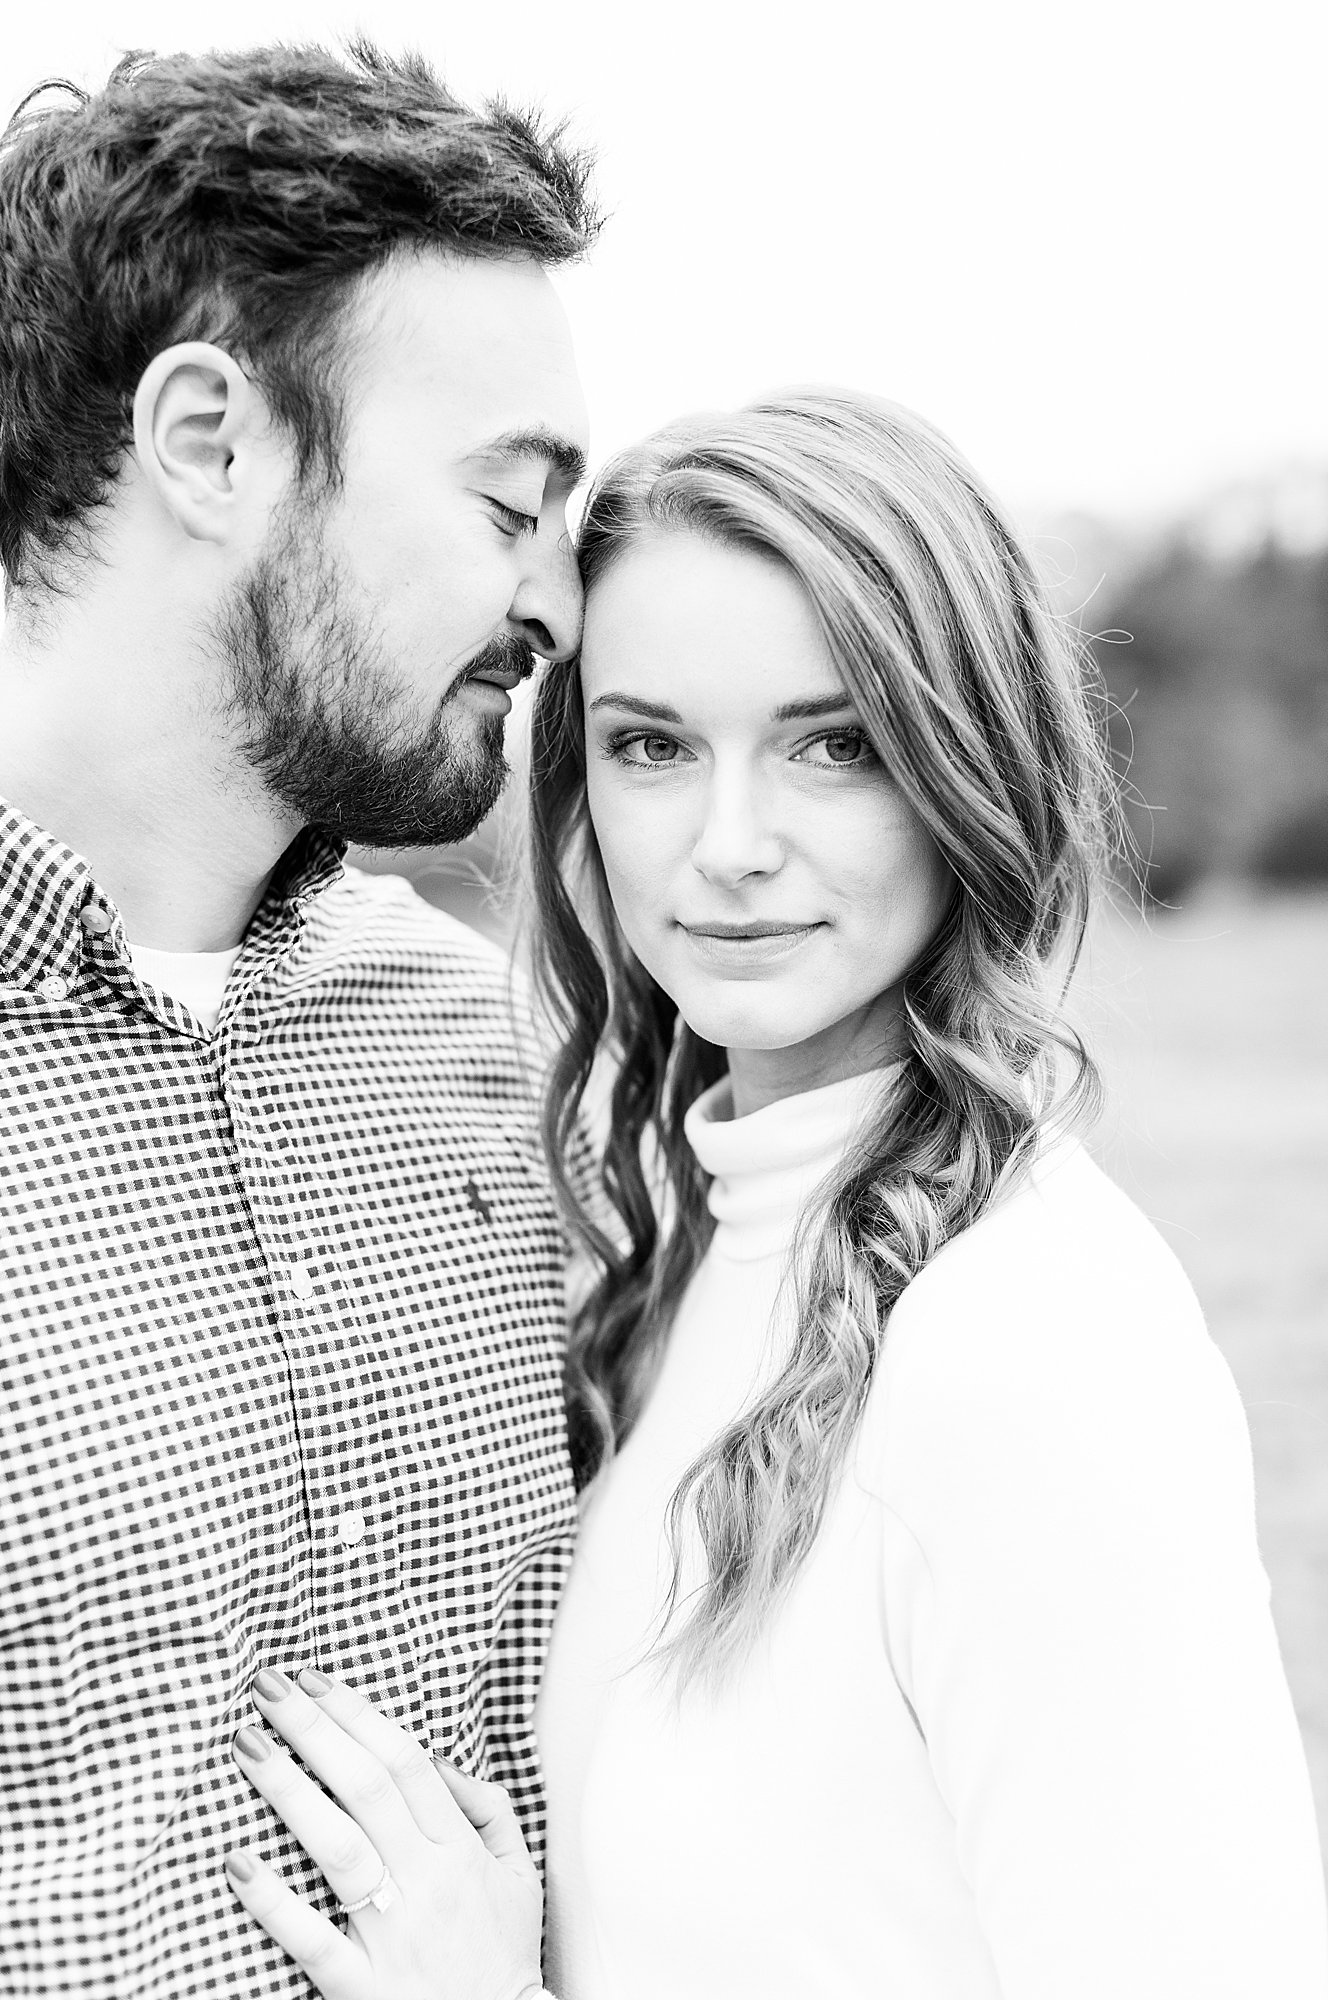 Engagement photos in black and white.